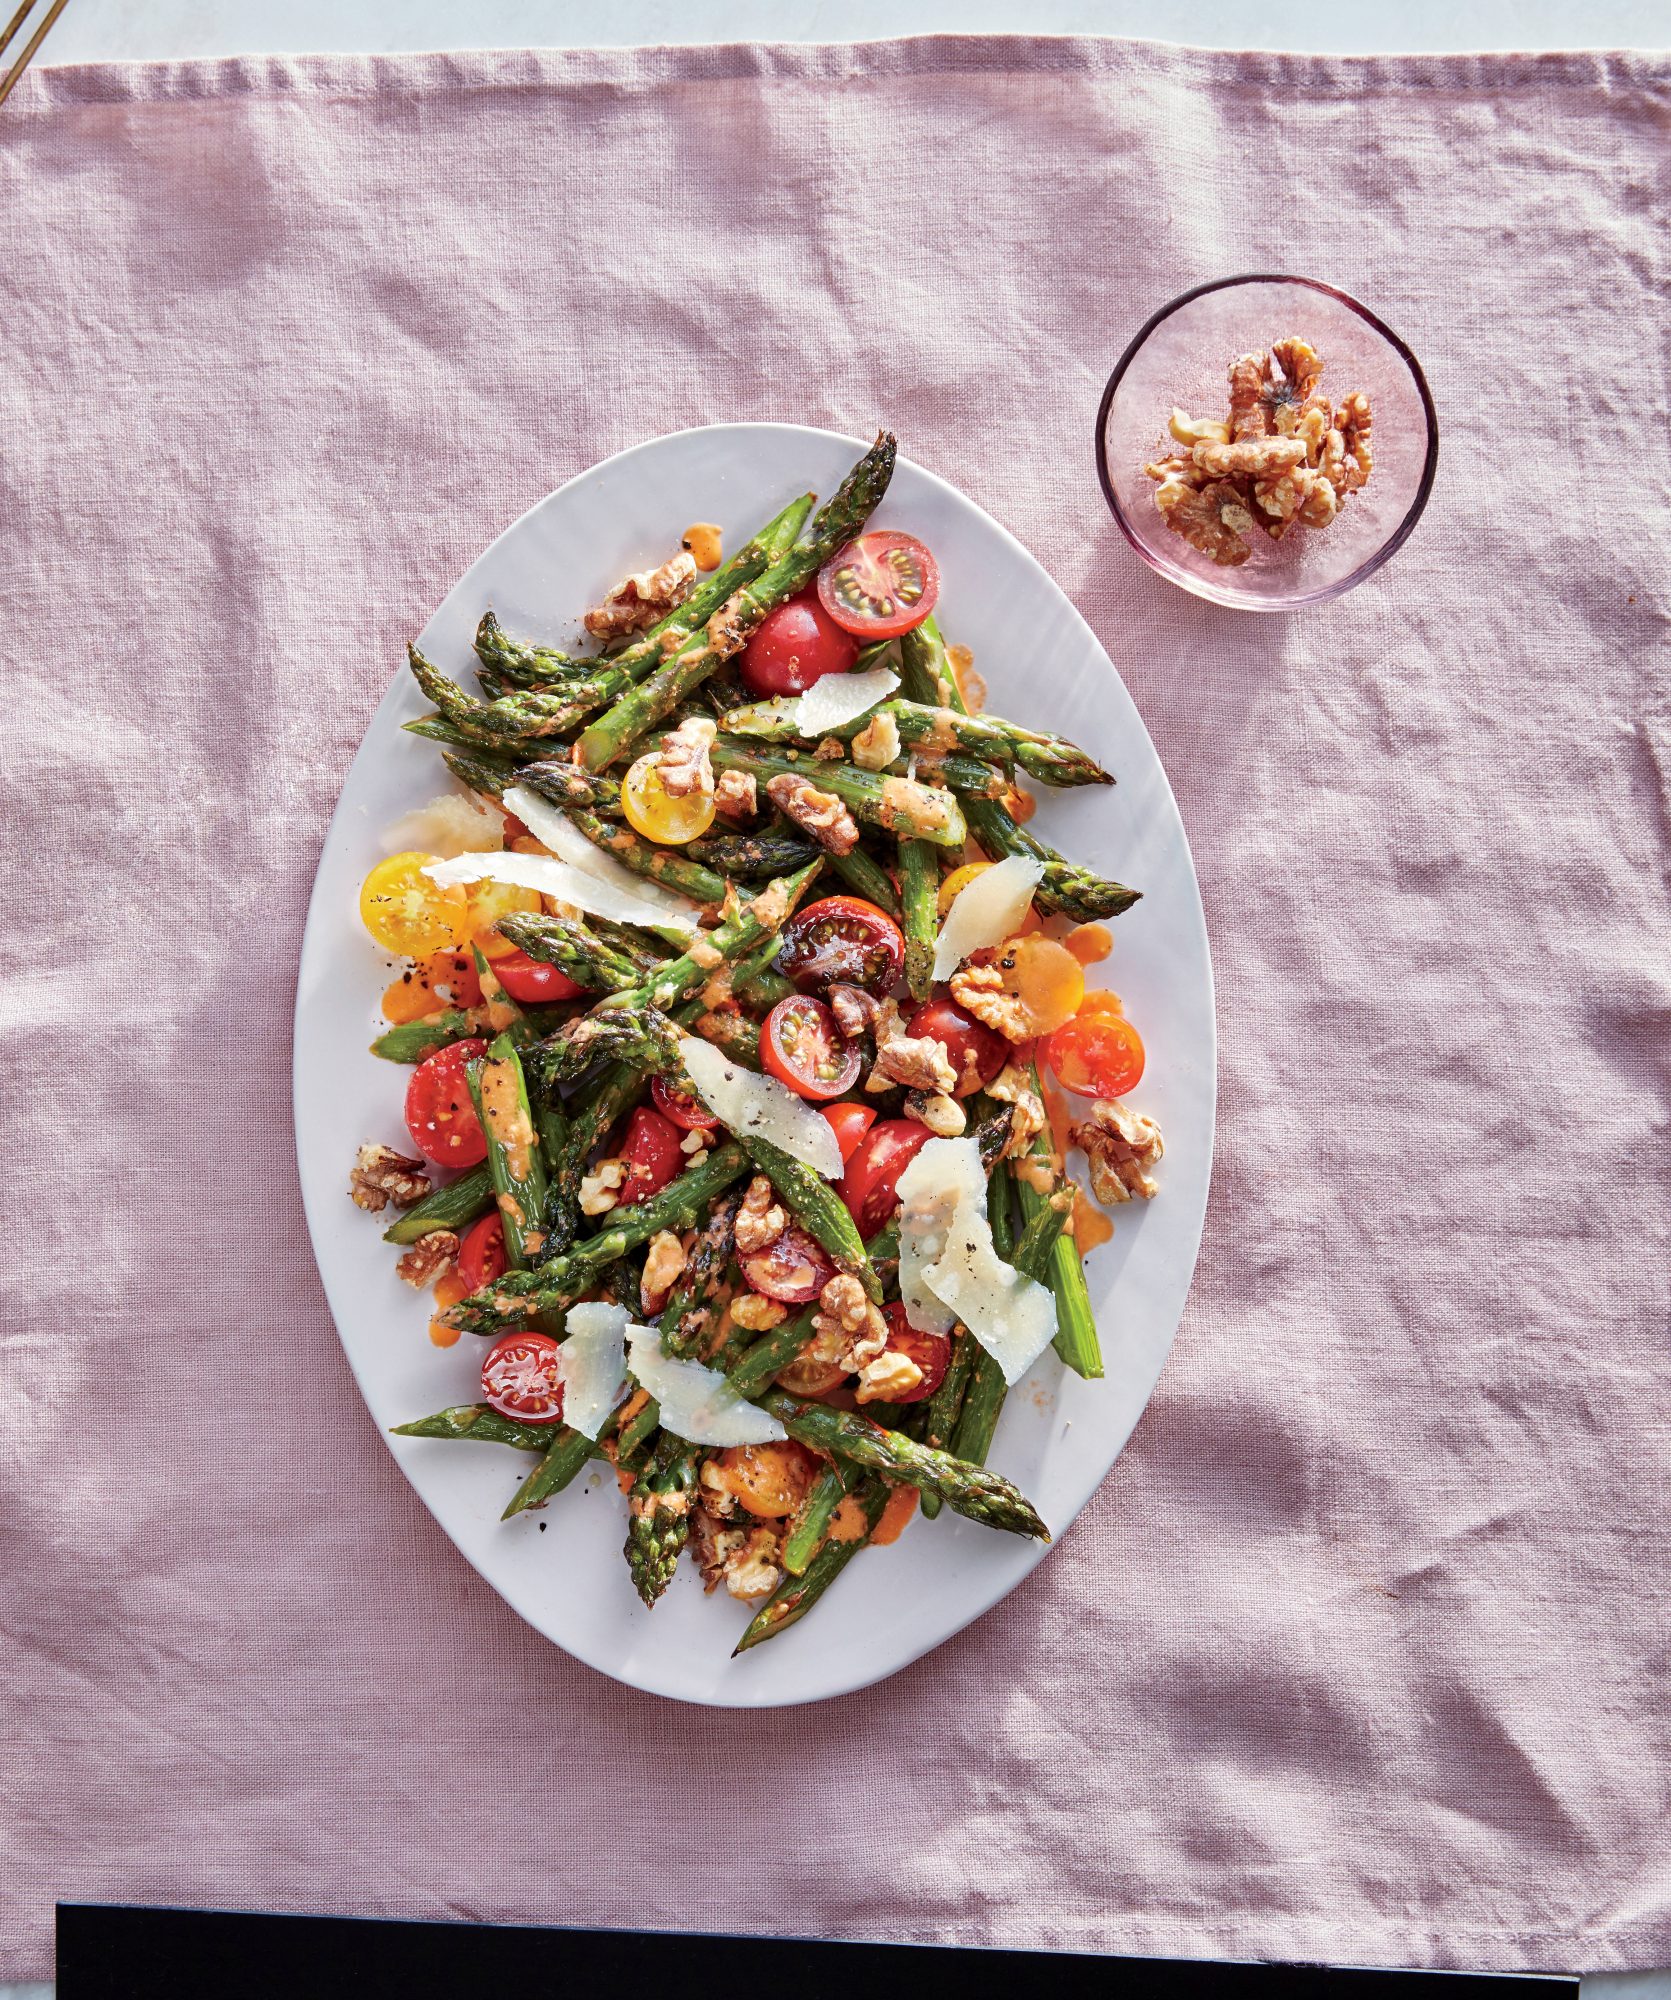 Roasted Asparagus with Walnuts, Parmesan, and Cherry Tomatoes